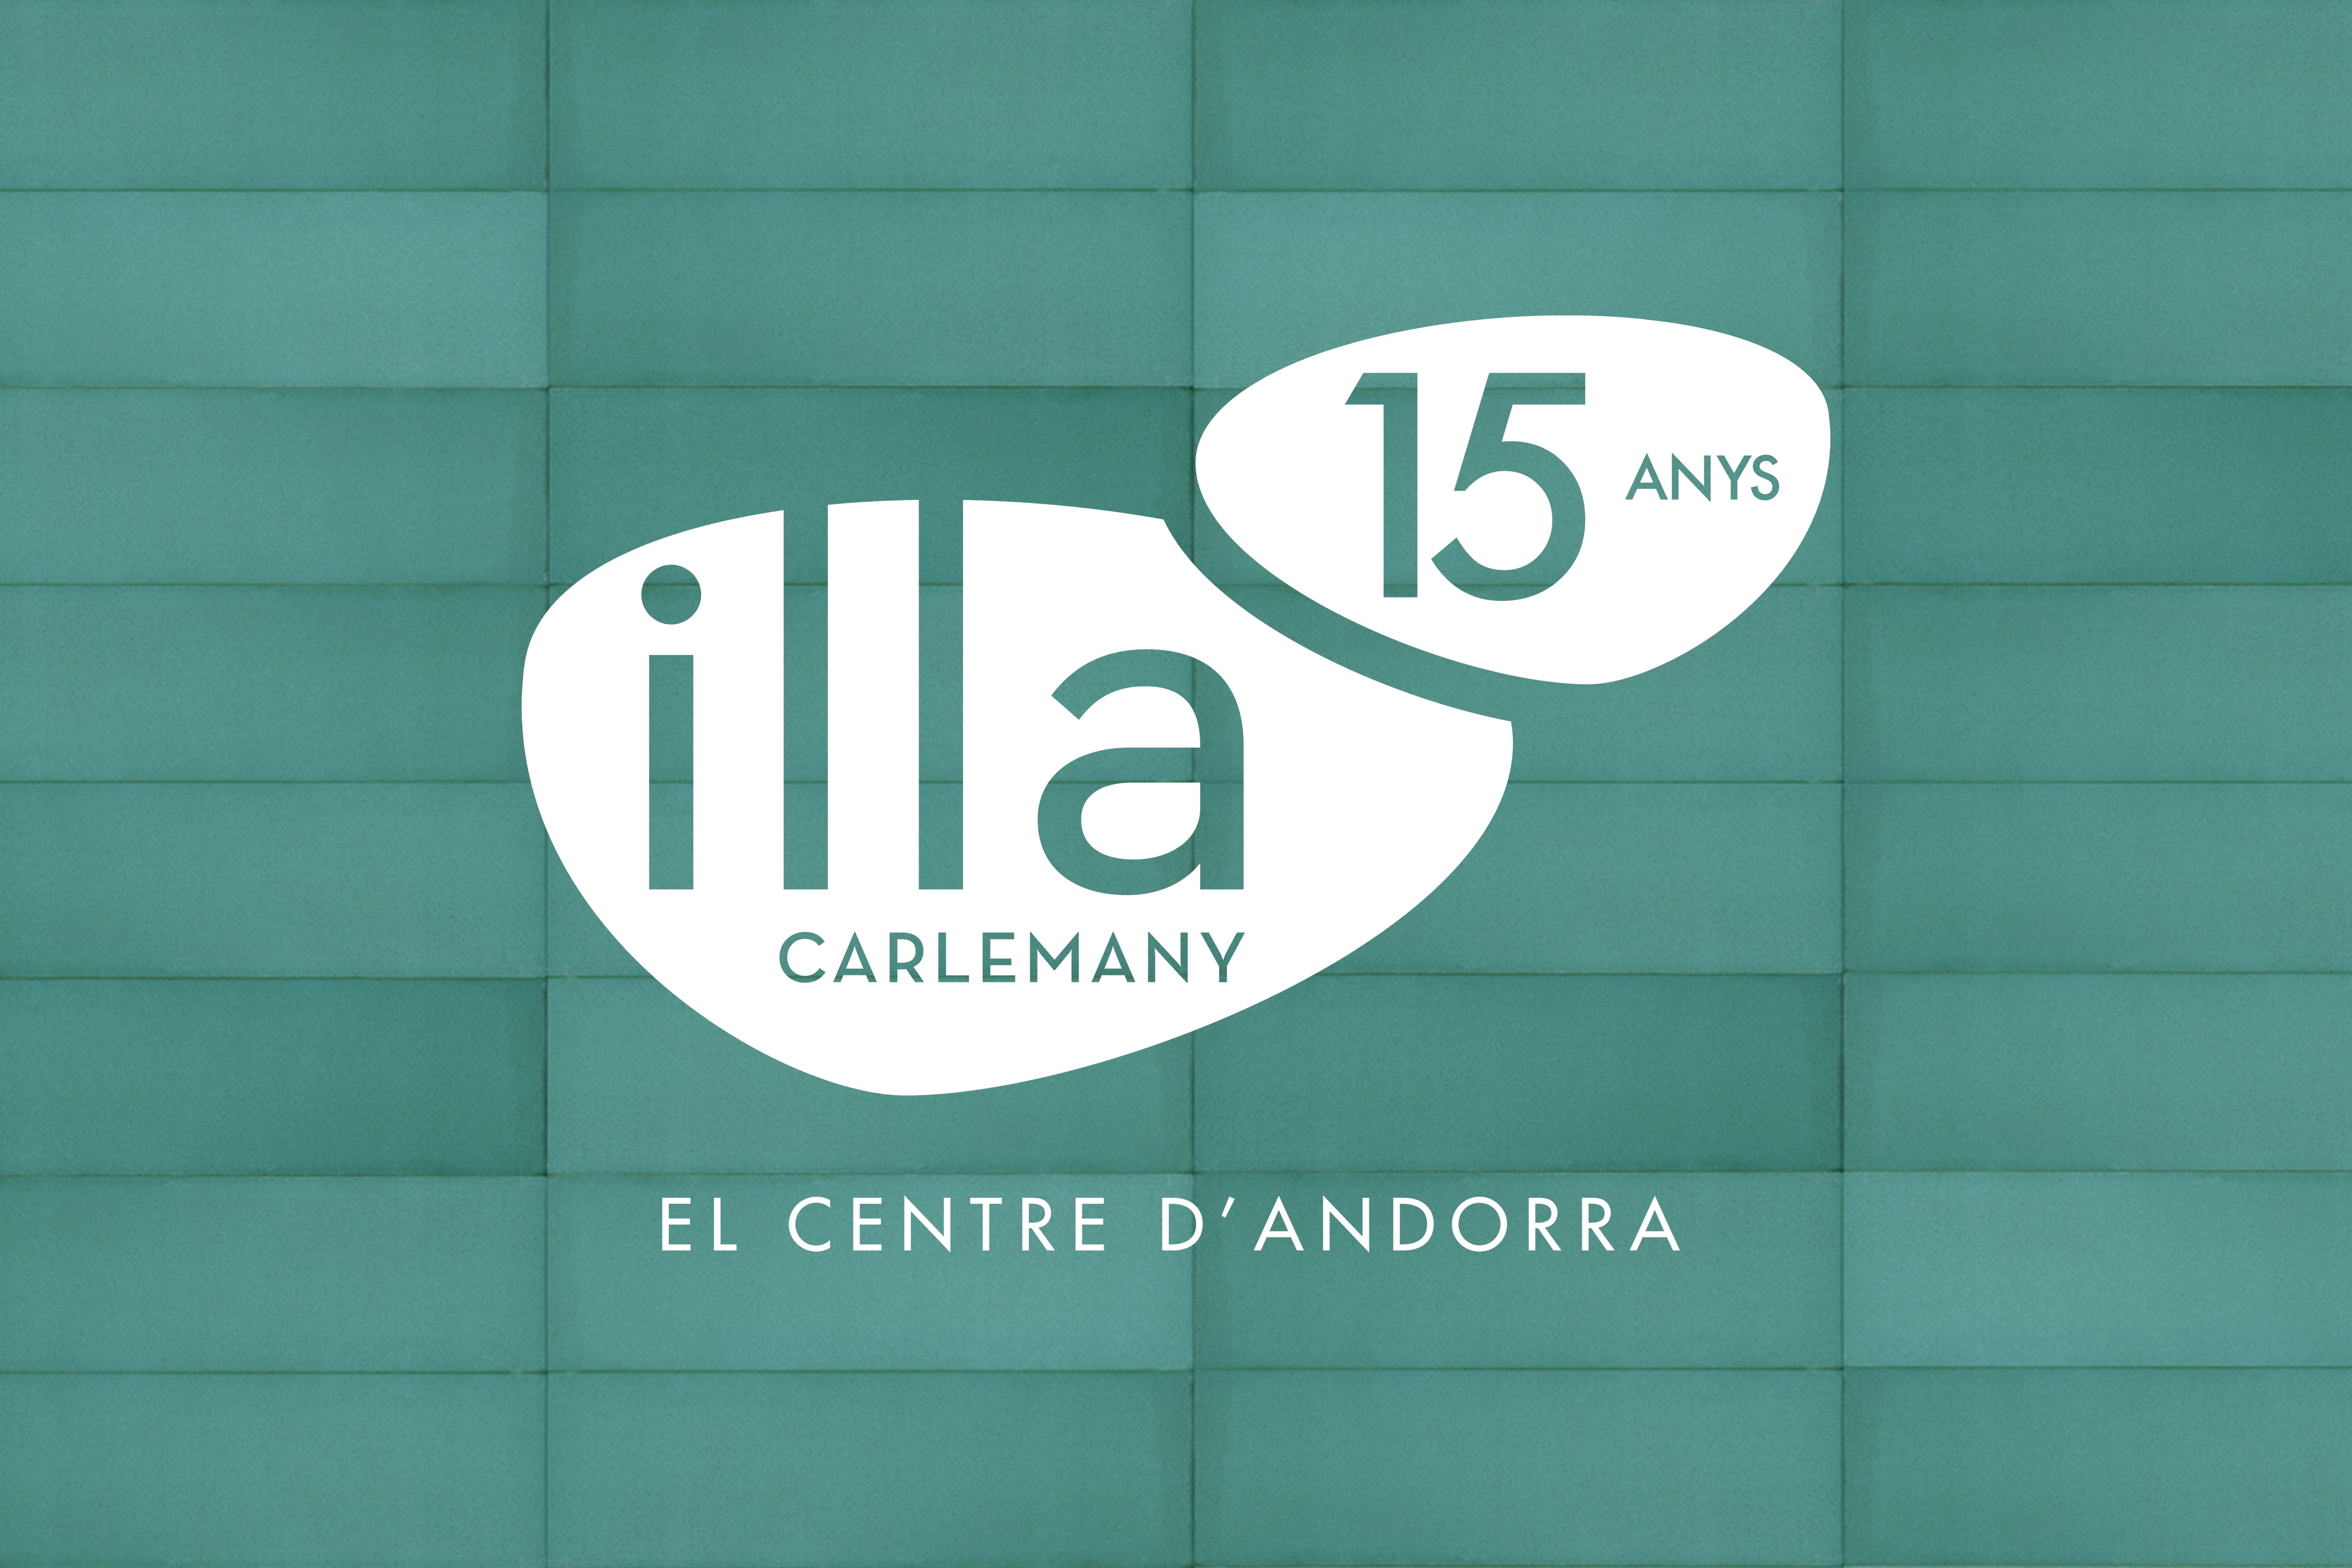 At the illa Carlemany shopping centre in Andorra we’ve turned 15!￼